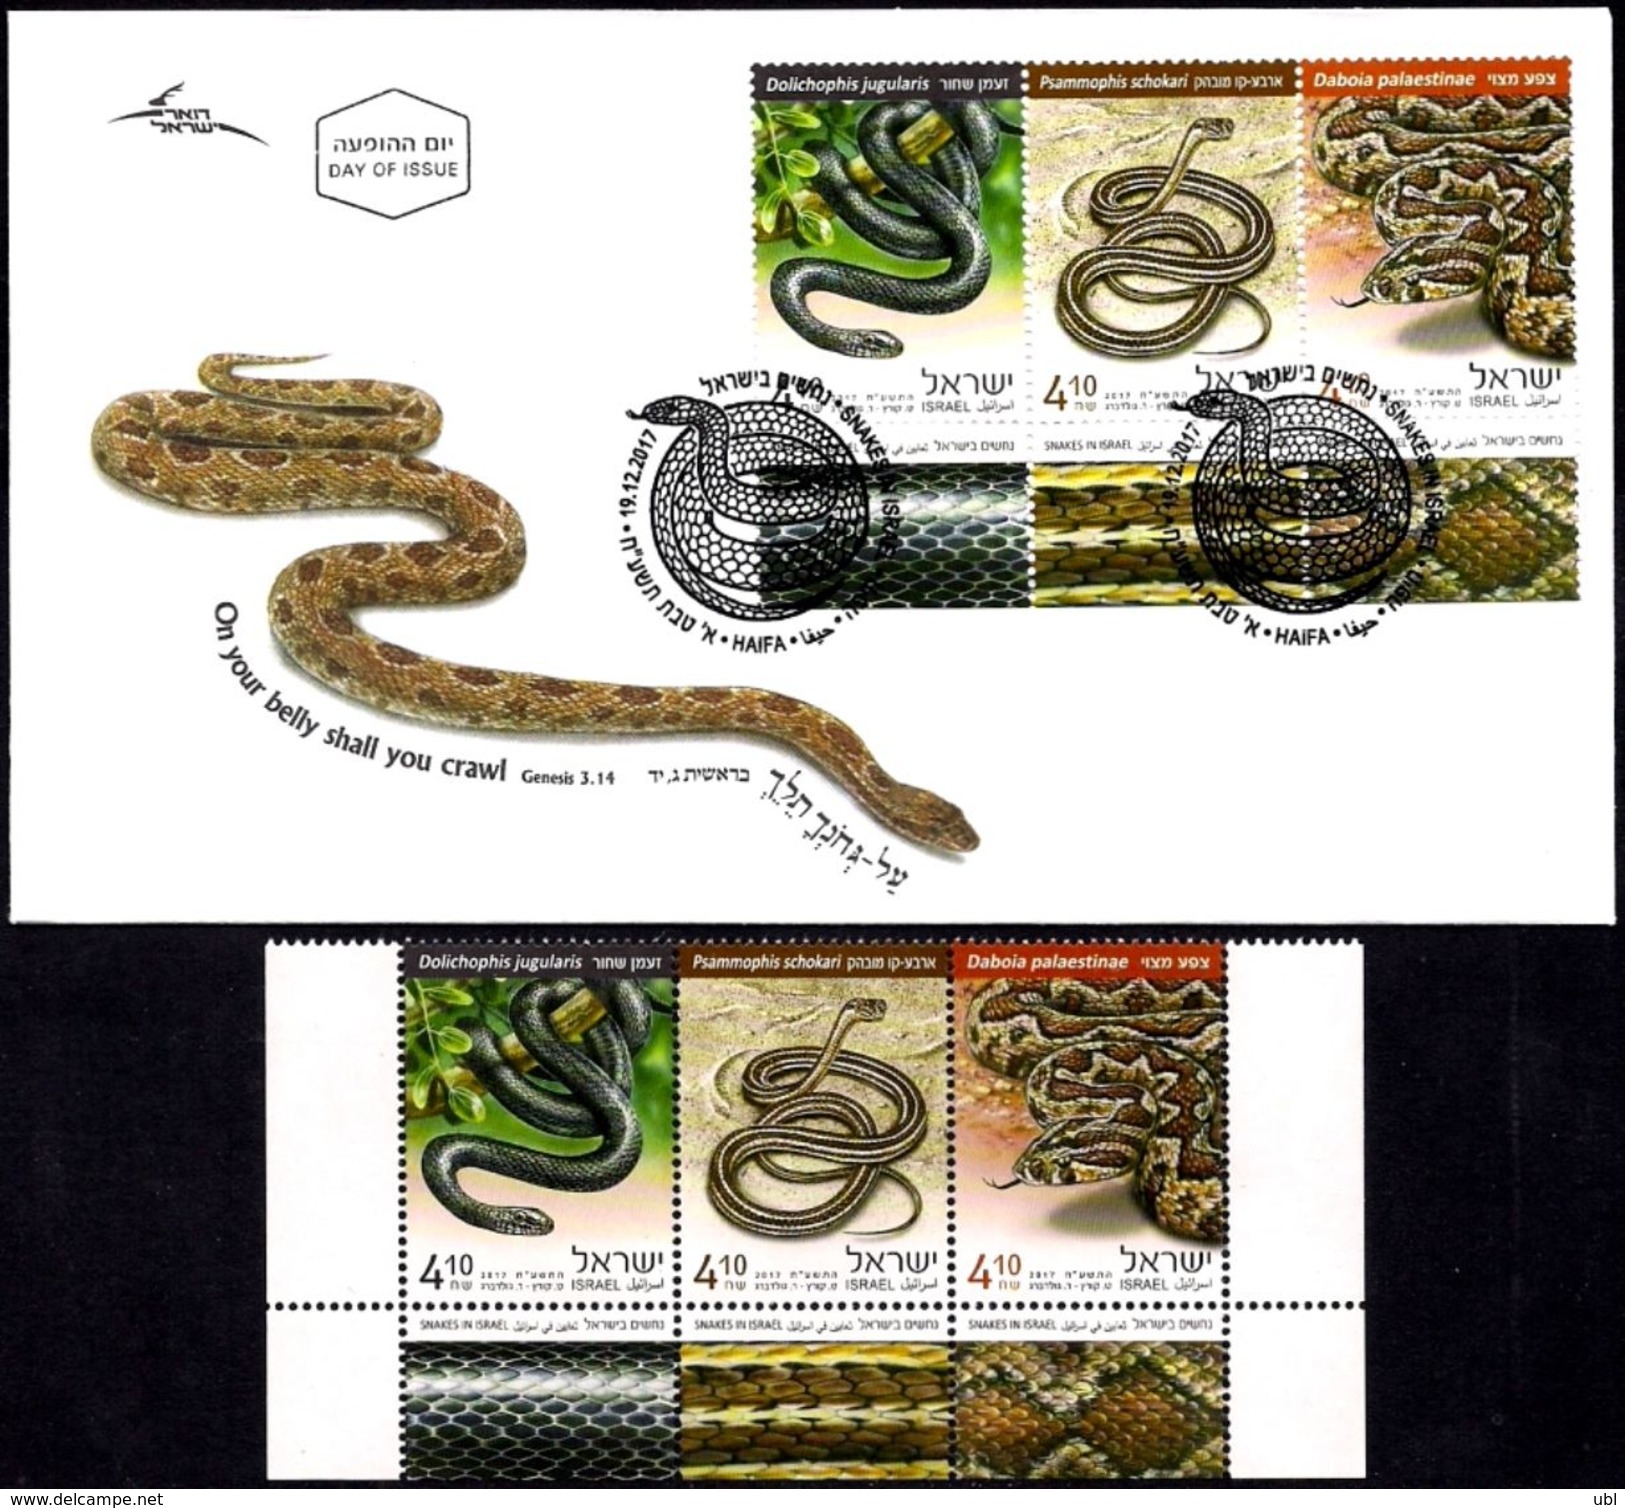 ISRAEL 2017 - Snakes In Israel - Palestine Viper; Schokari Sand Racer & Large Whip Snake - 3 Stamps With Tabs - MNH&FDC - Snakes